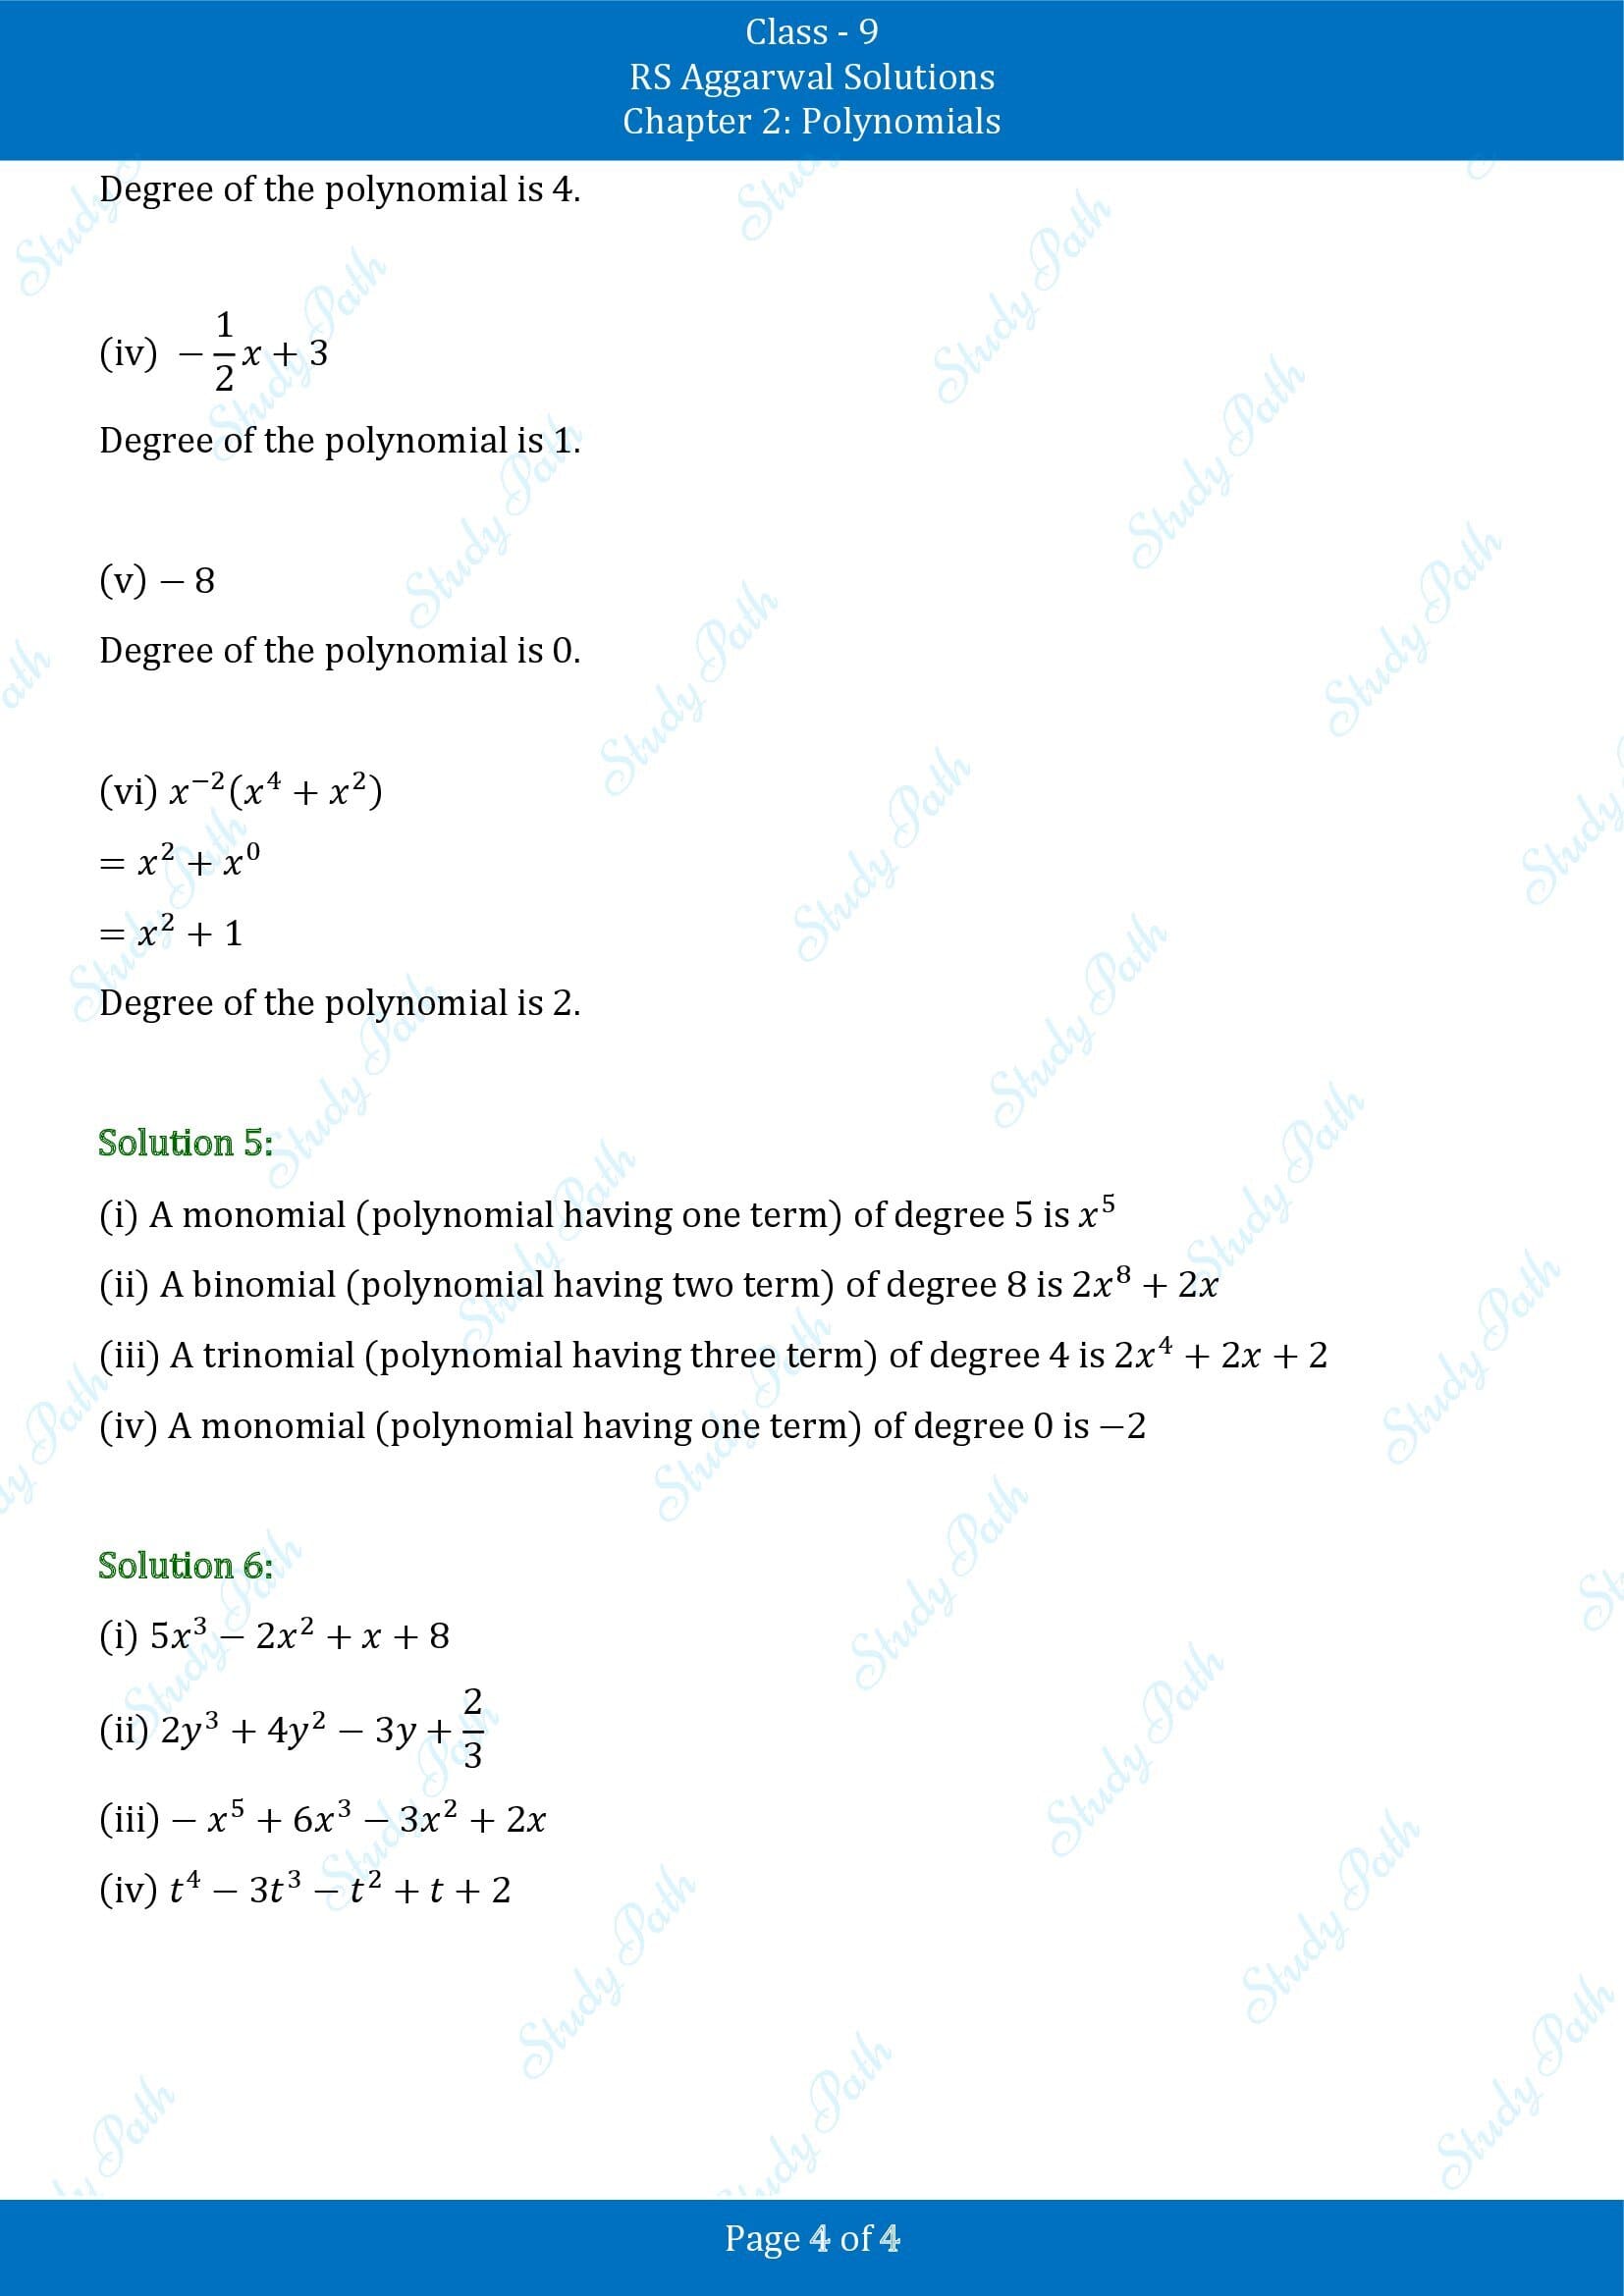 RS Aggarwal Solutions Class 9 Chapter 2 Polynomials Exercise 2A 00004